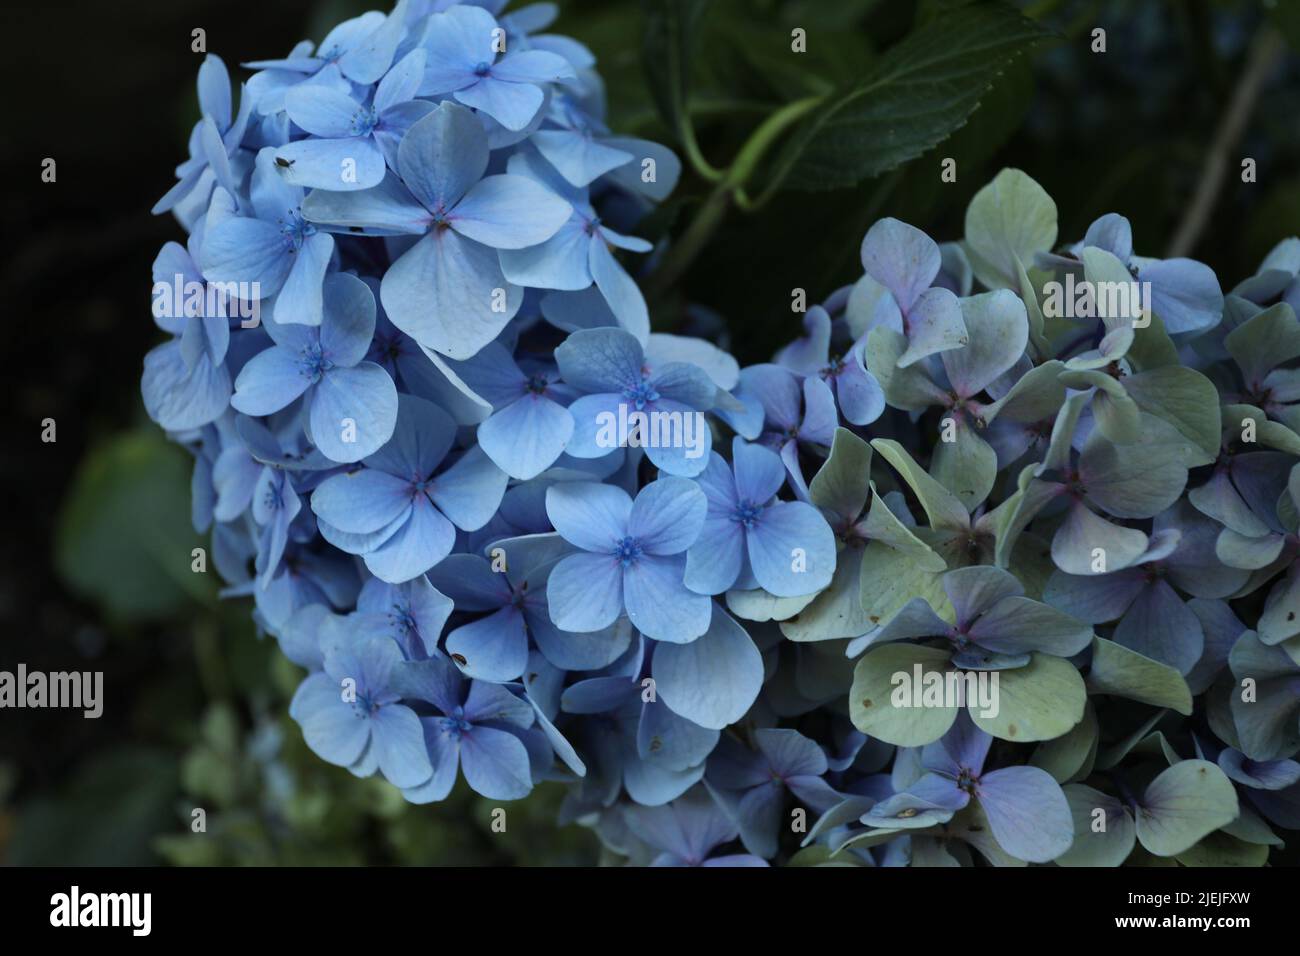 Blue flowers with a lot of petals Stock Photo - Alamy